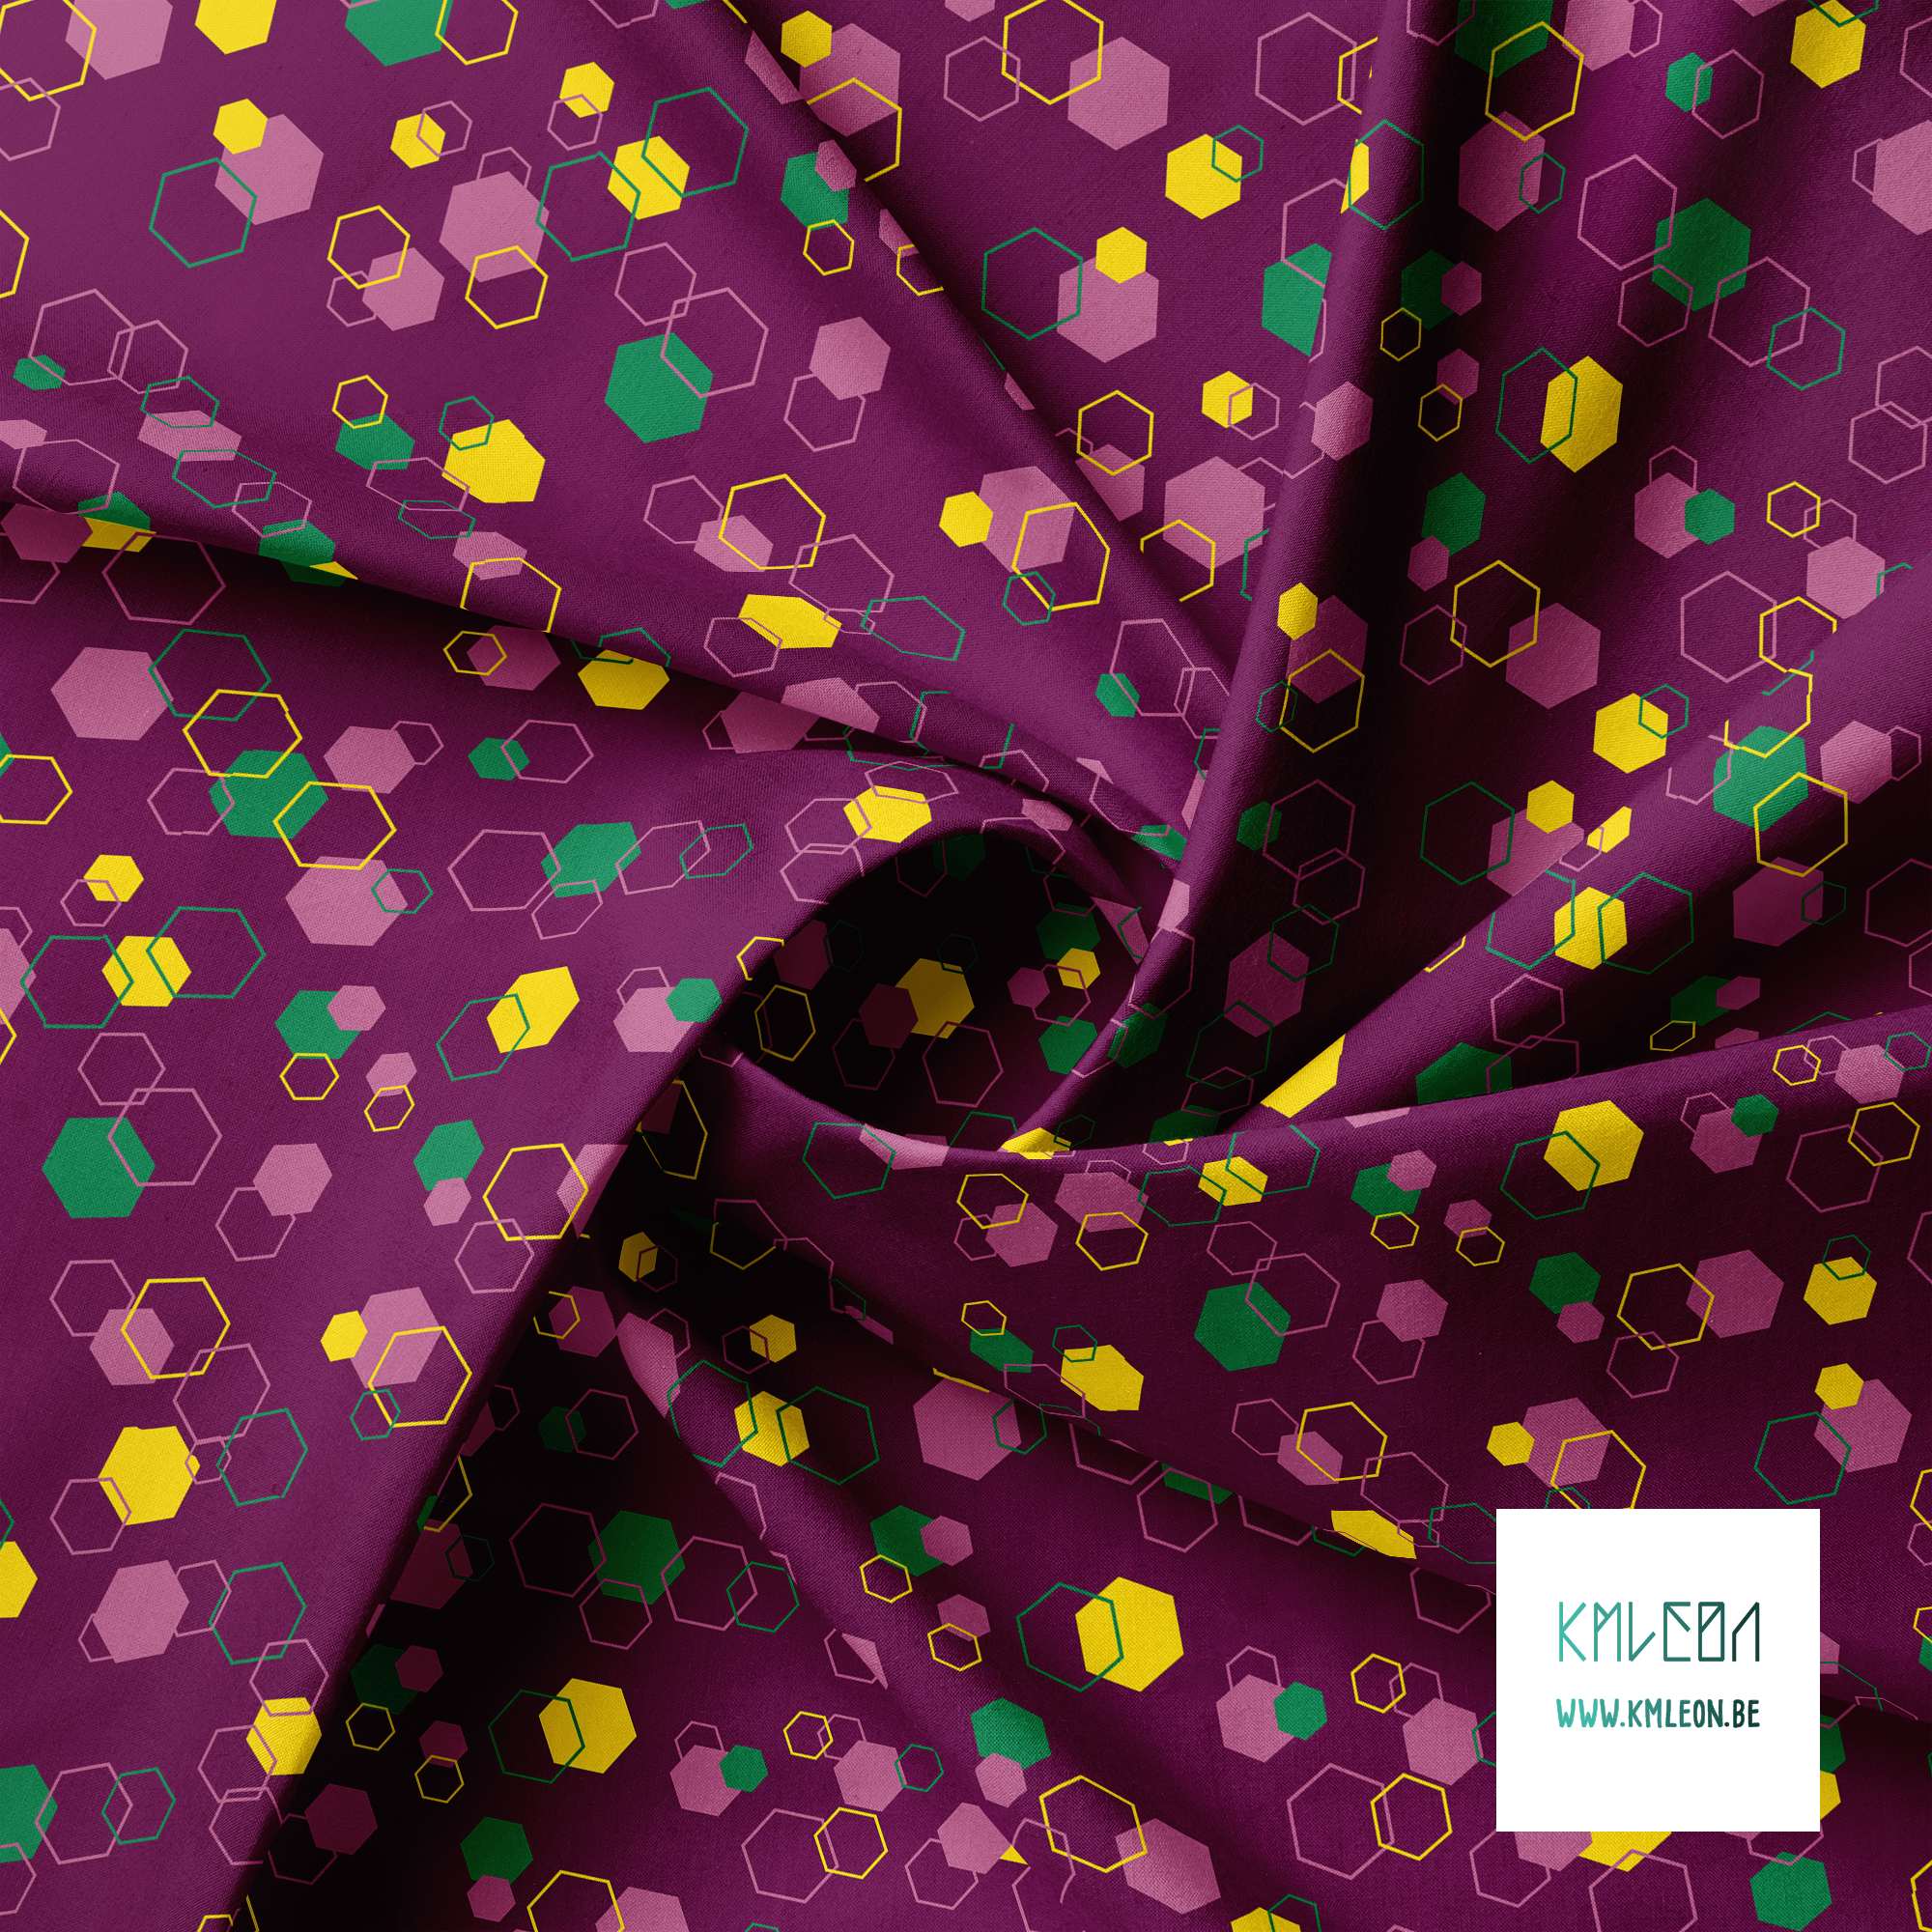 Random pink, yellow and green octagons fabric